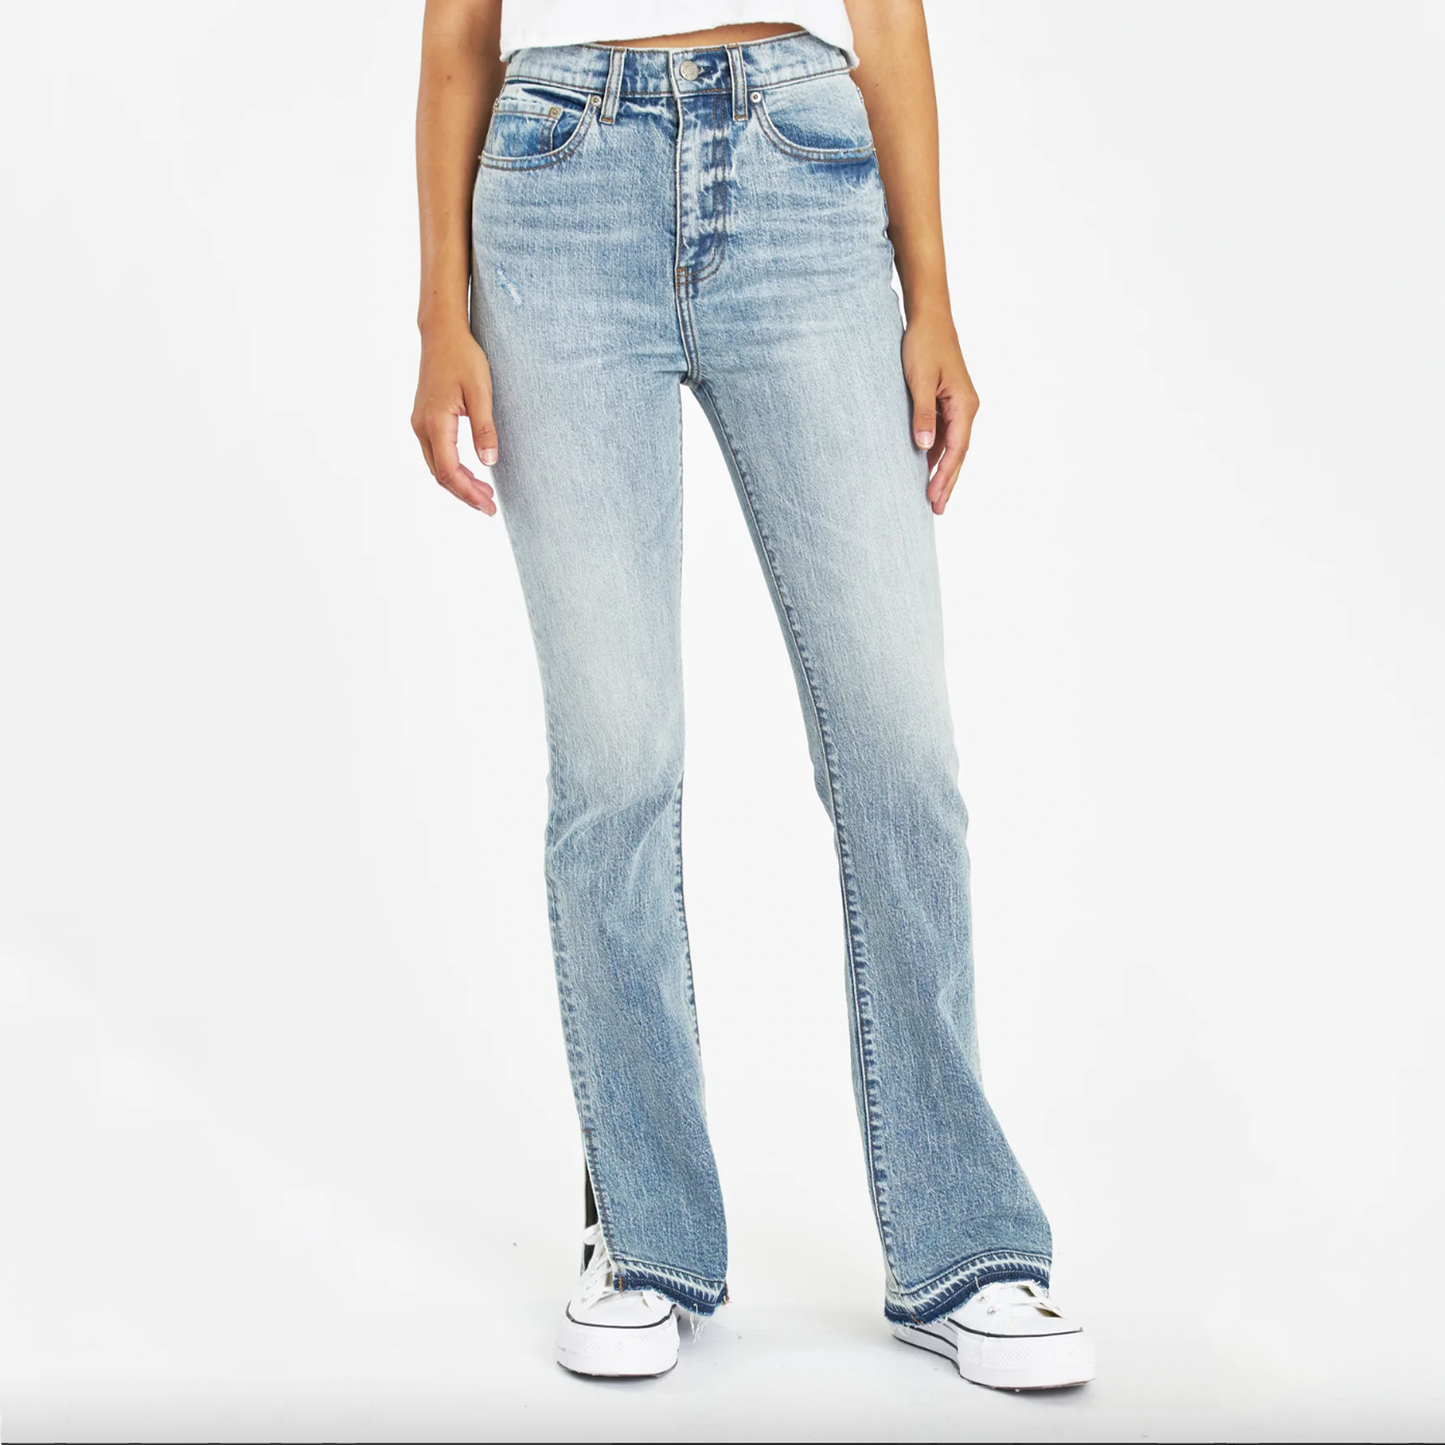 Daze Go-Getter Slim High Rise Flare With Side Slit Jean. The Go-getter in Double Dare is made to look like an authentic vintage pant. It's mostly rigid but yields to your body in all the right ways where you need it to